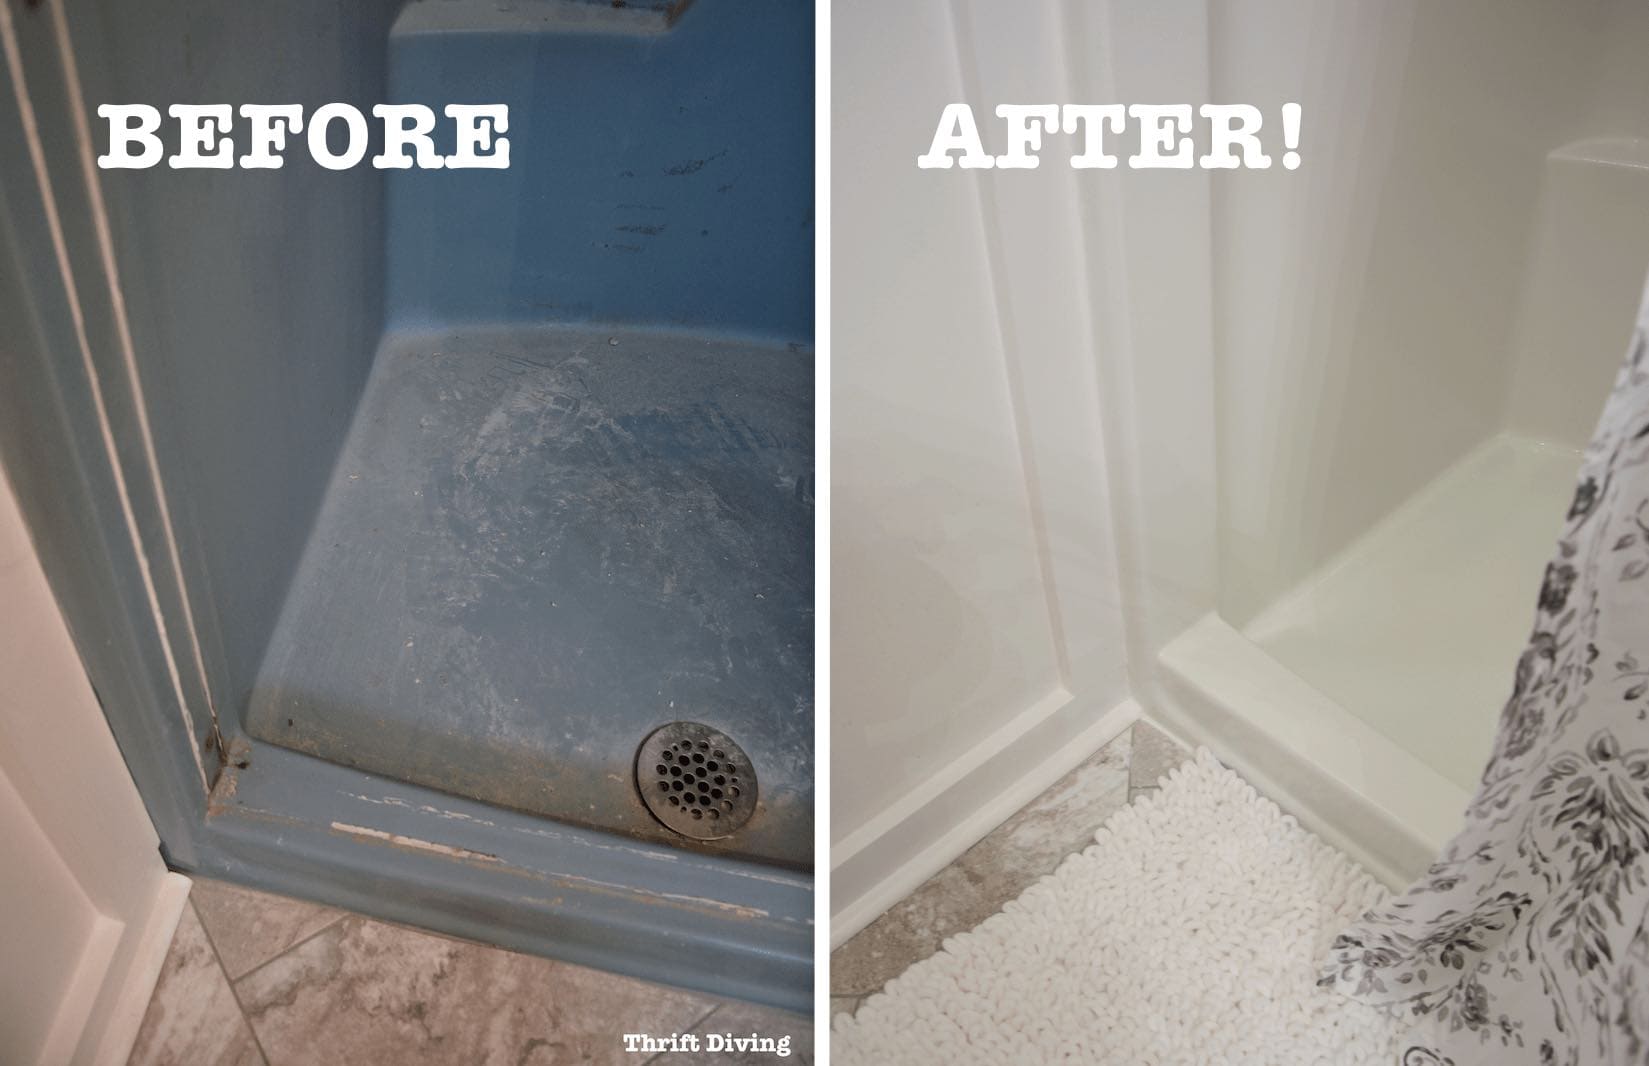 Shower and Tub Refinishing - How to paint your tub or shower if it's worn or colorful from the 1970s. - Thrift Diving